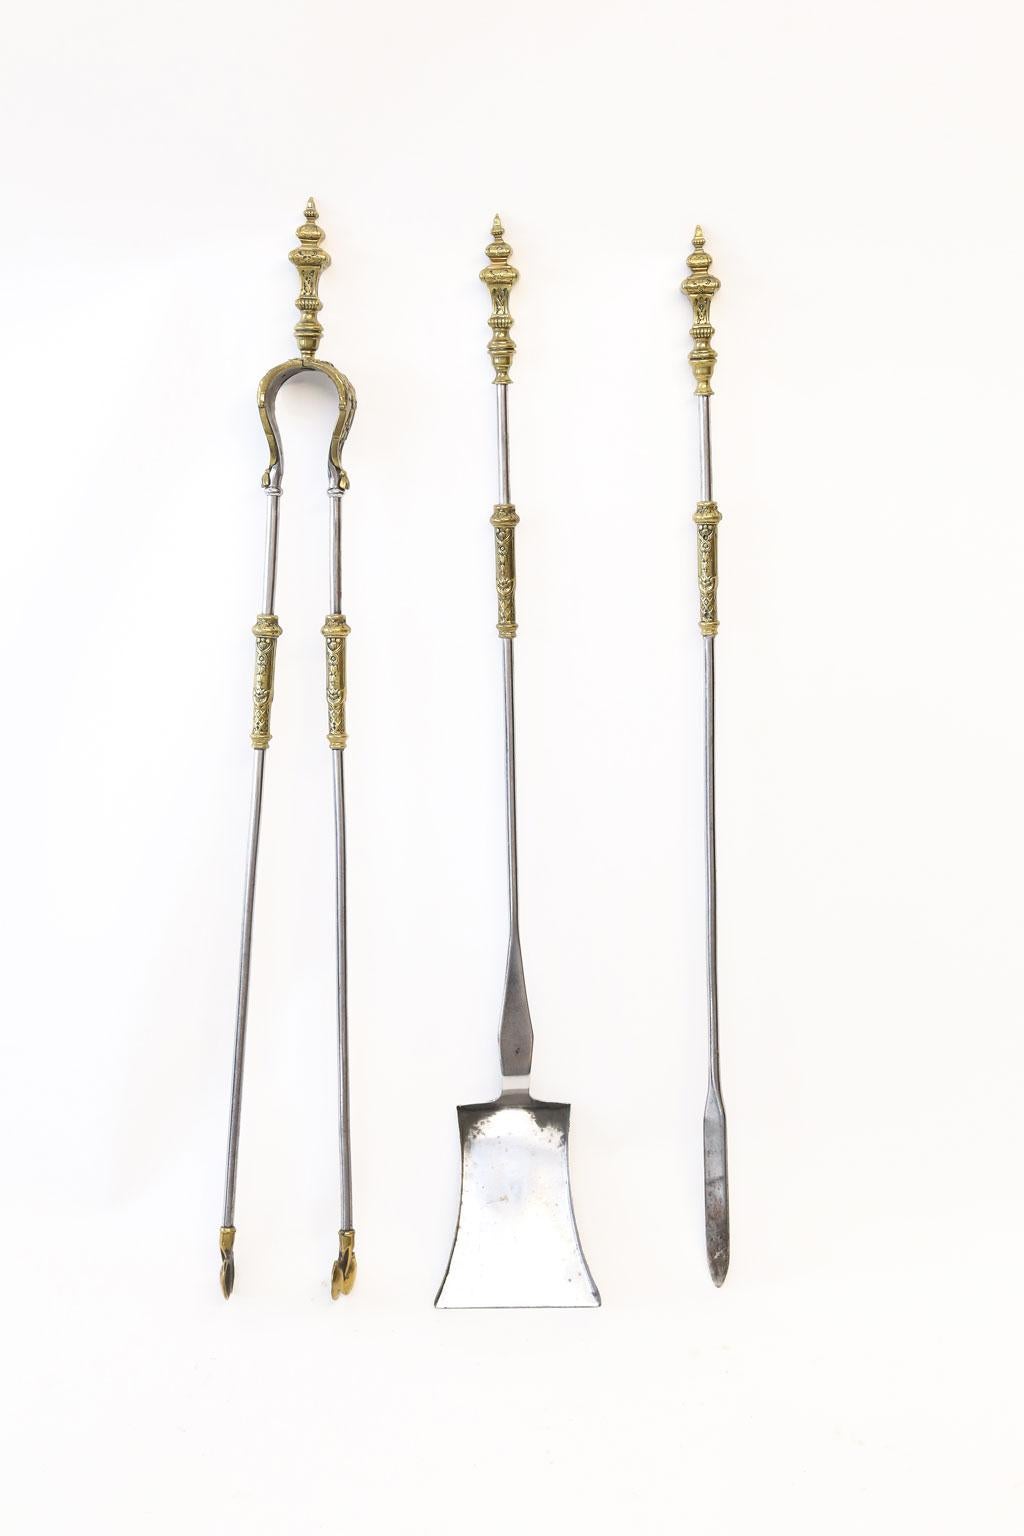 Set of 19th century English fire tools cast in steel and gilt-brass. Nice wear visible. Later application of clear lacquered finish. 

Shovel measures 2.5 inches high x 4.5 inches wide x 30 inches deep. 
Poker measures 1.13 inches high x 1 inch